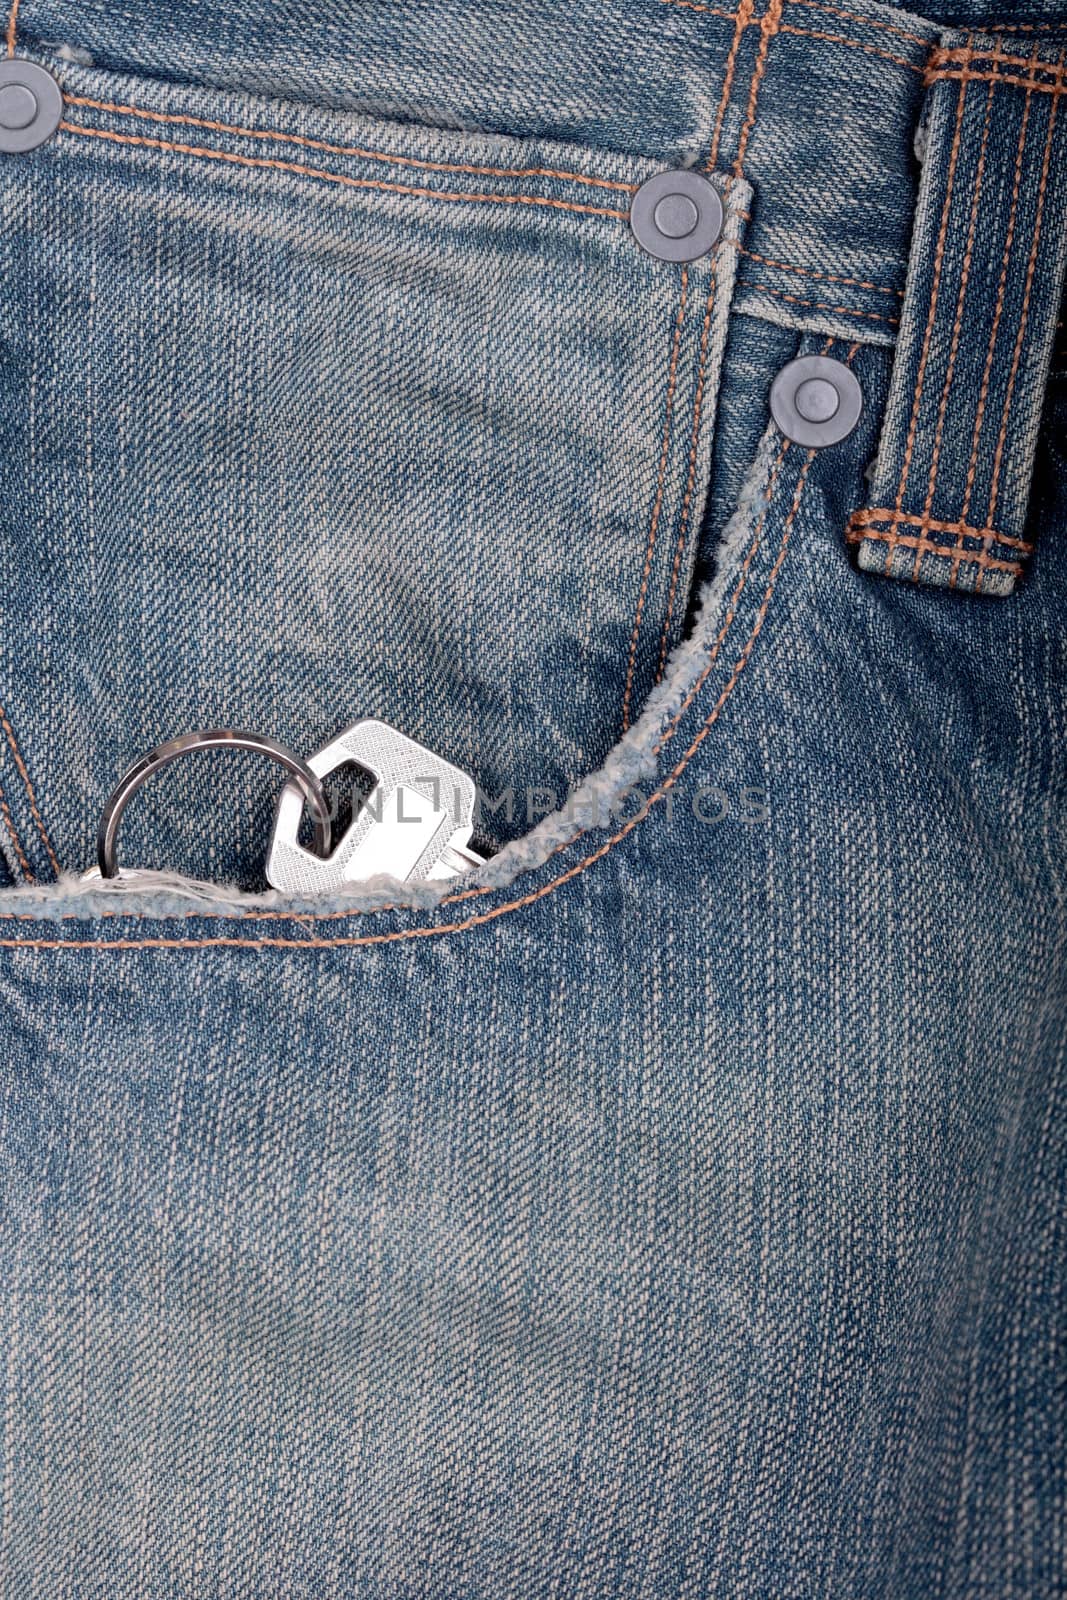 picture of a key inside  a pocket of a jeans